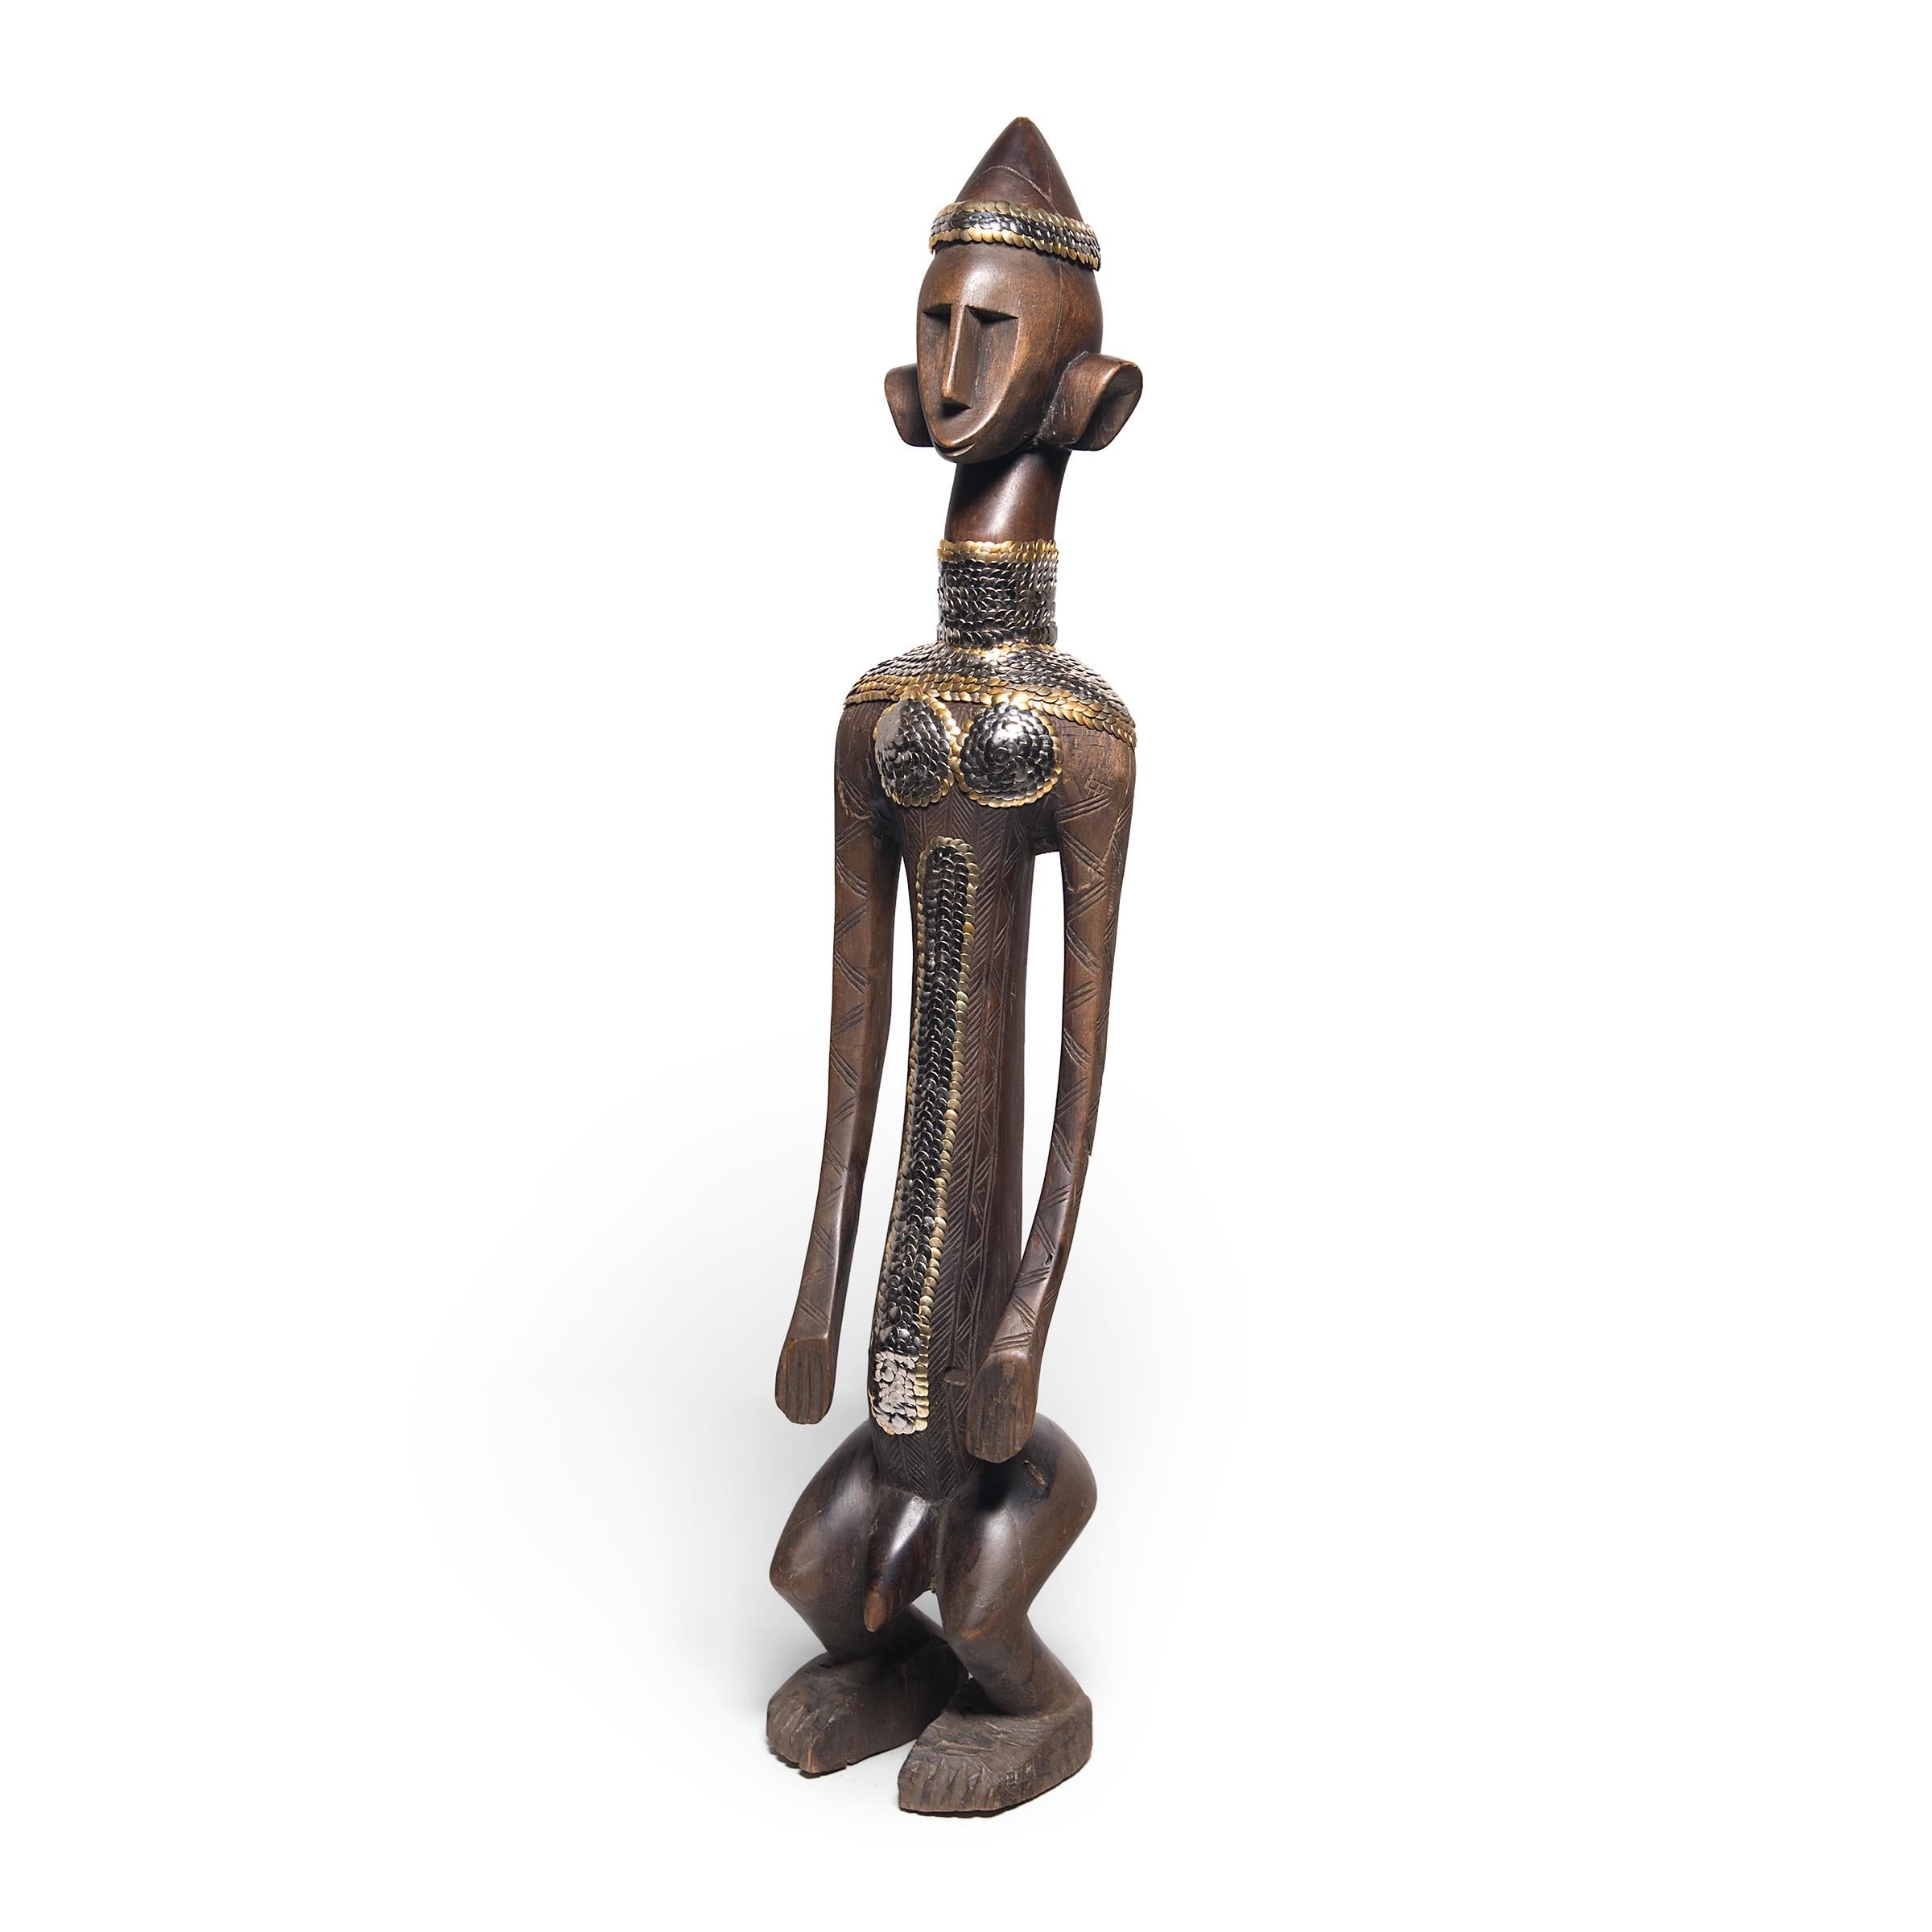 In an exclusive collaboration with pagoda red, Chicago artist the bms. adds a contemporary twist to our collection of one-of-a-kind African art objects. Guided by its geometric line work, the bms. uses silver and gold thumbtacks to accentuate the